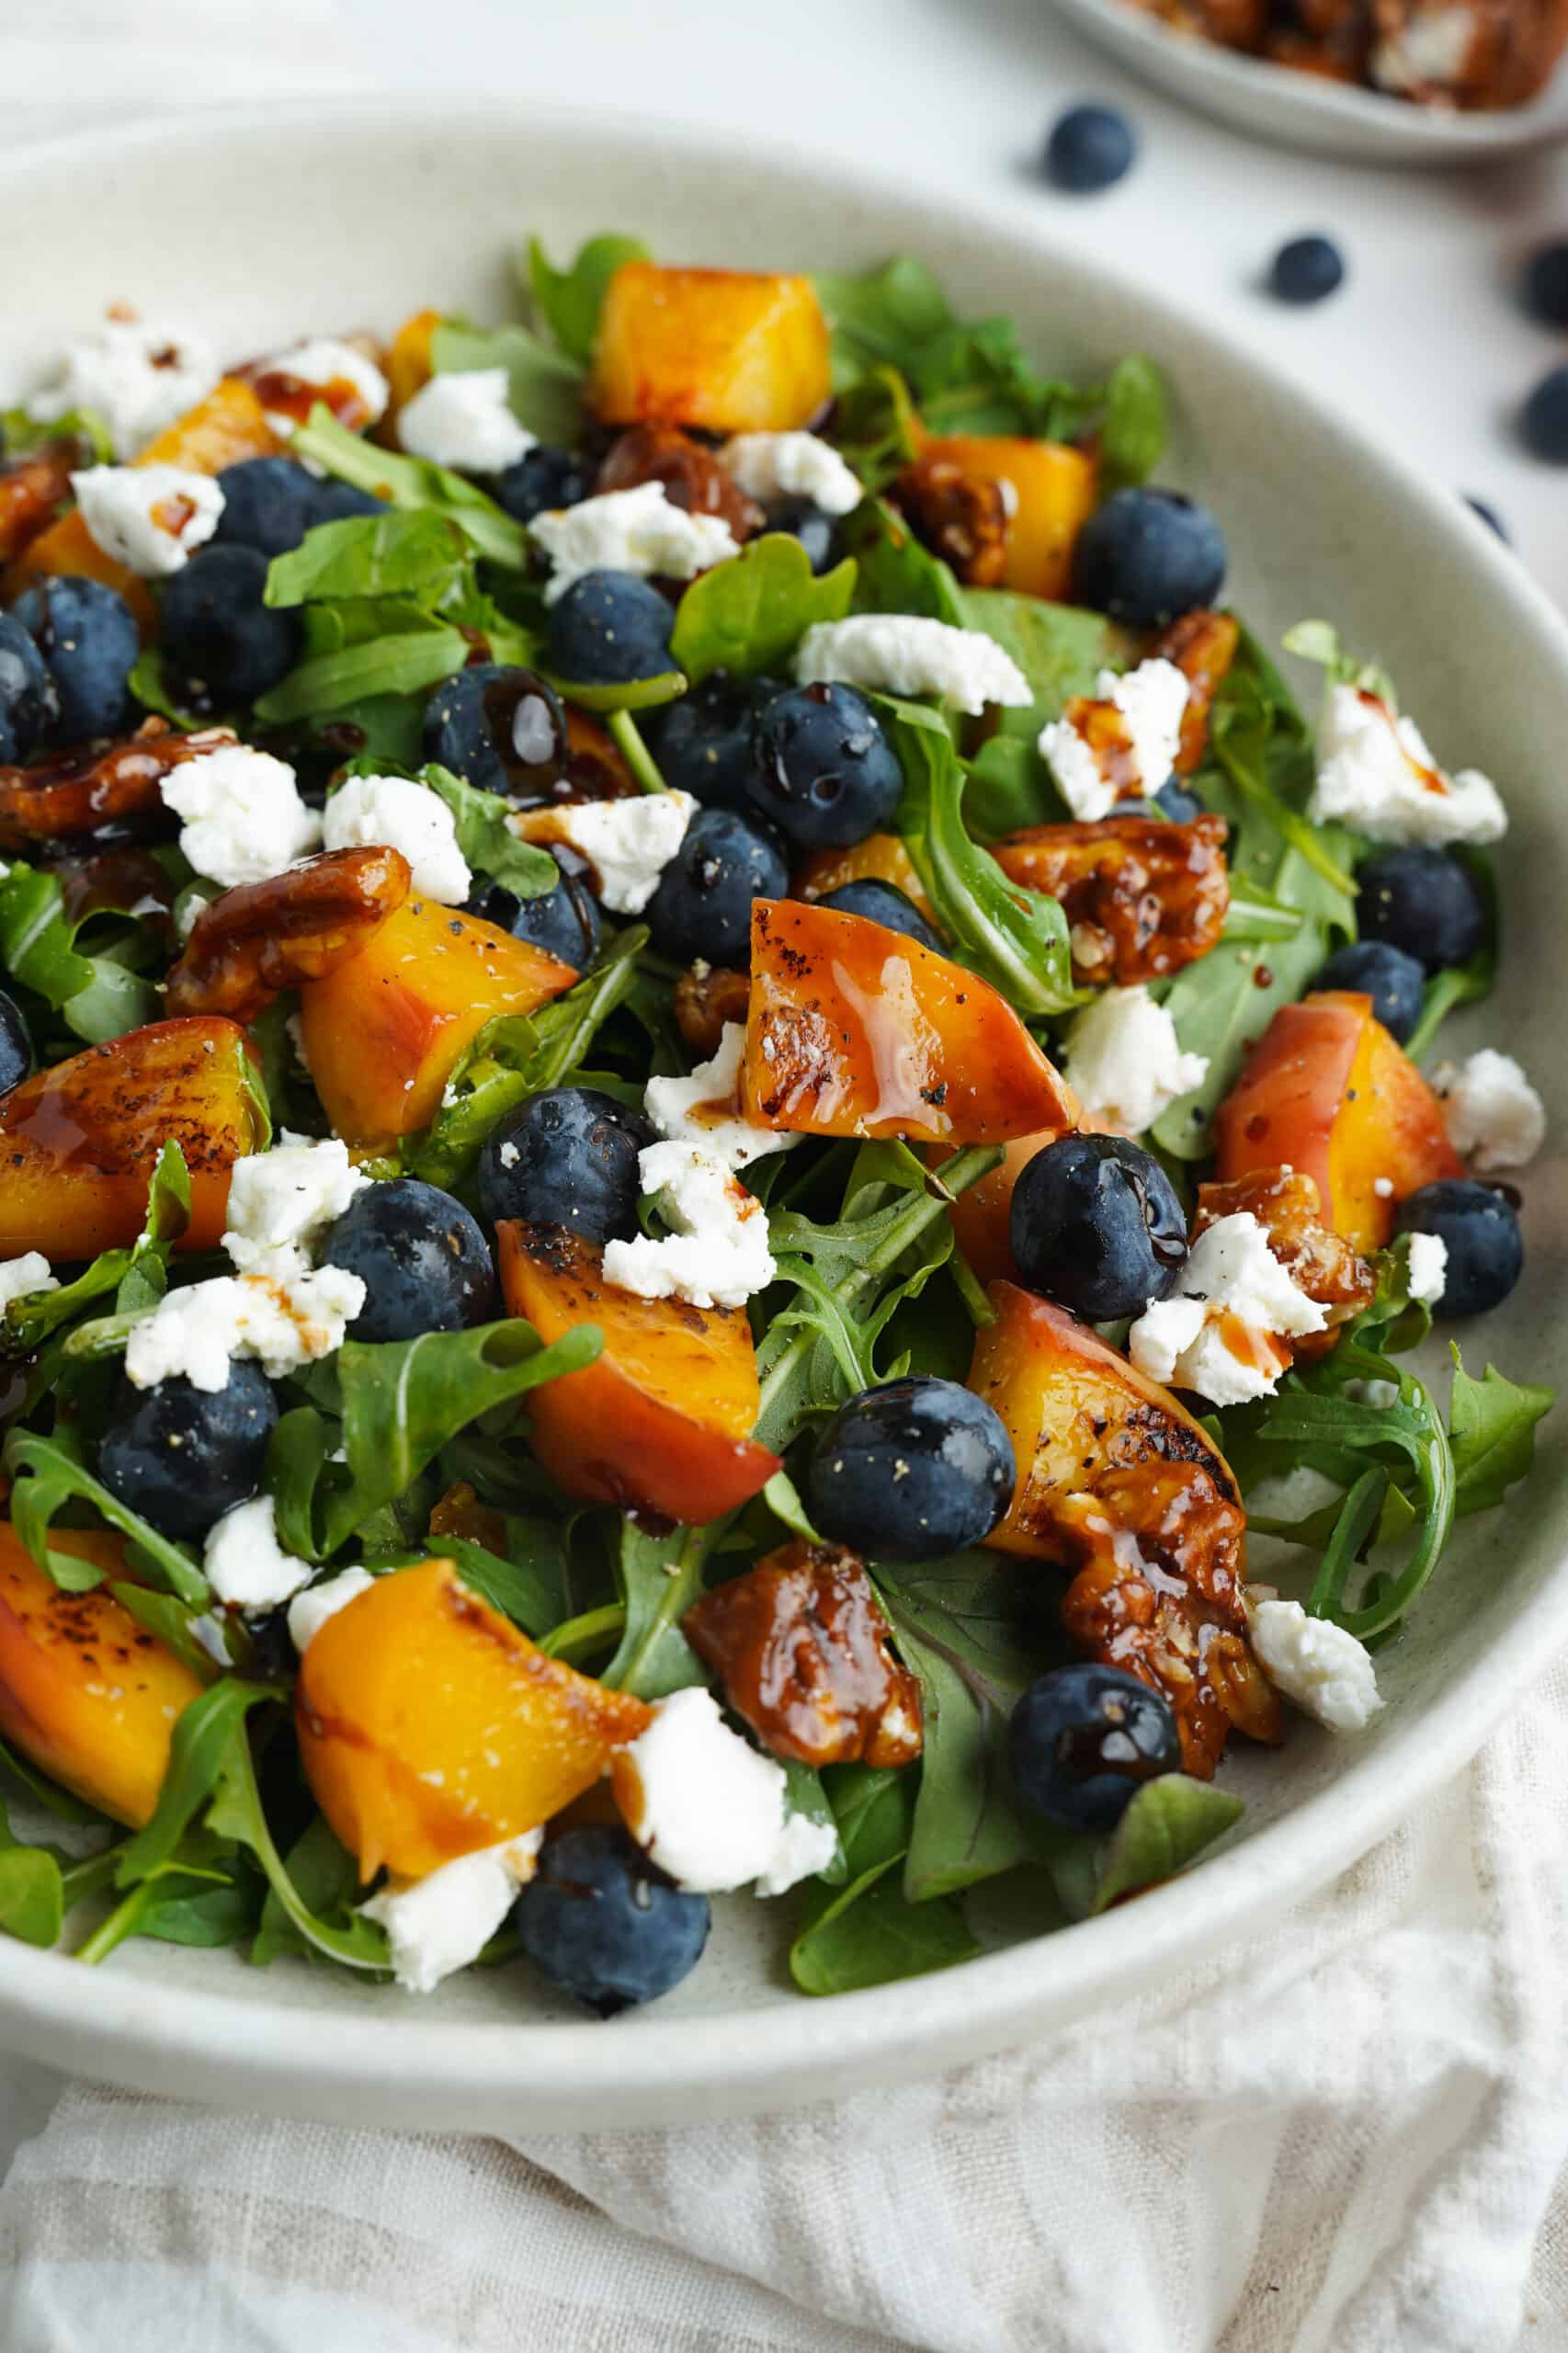 Peach Arugula Salad With Honey Balsamic Dressing ingredients | cookingwithcassandra.com